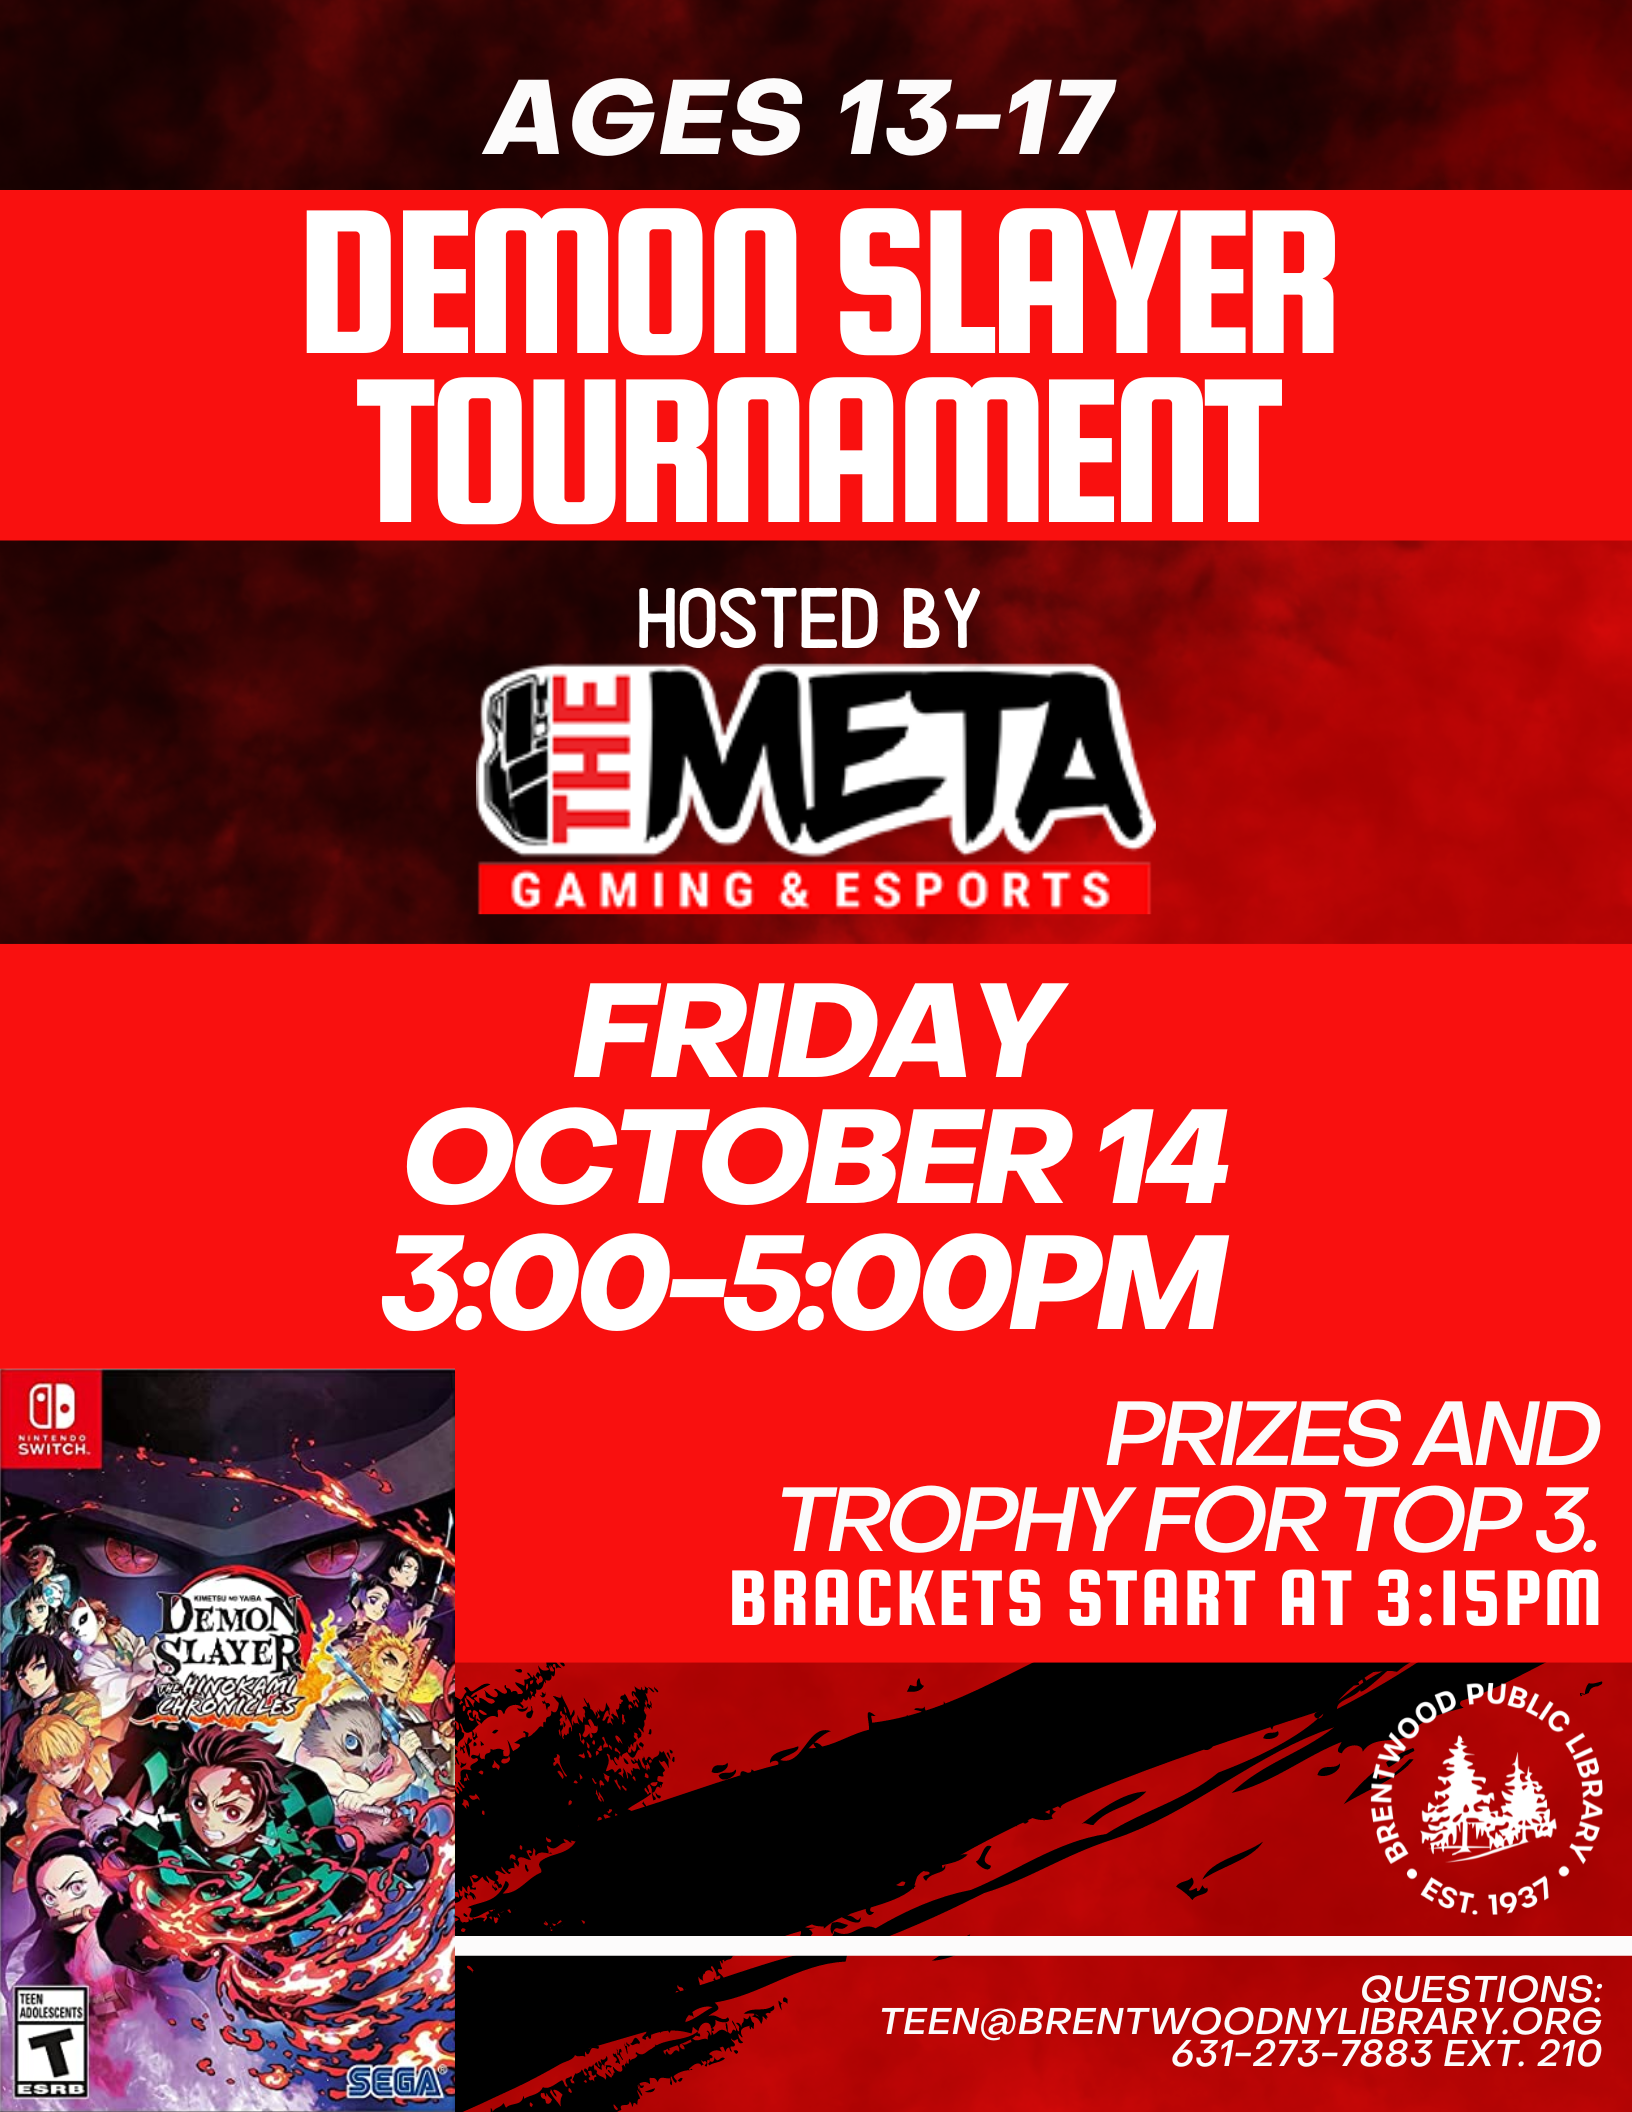 Demon Slayer Tournament Hosted by The Meta Gaming and eSports